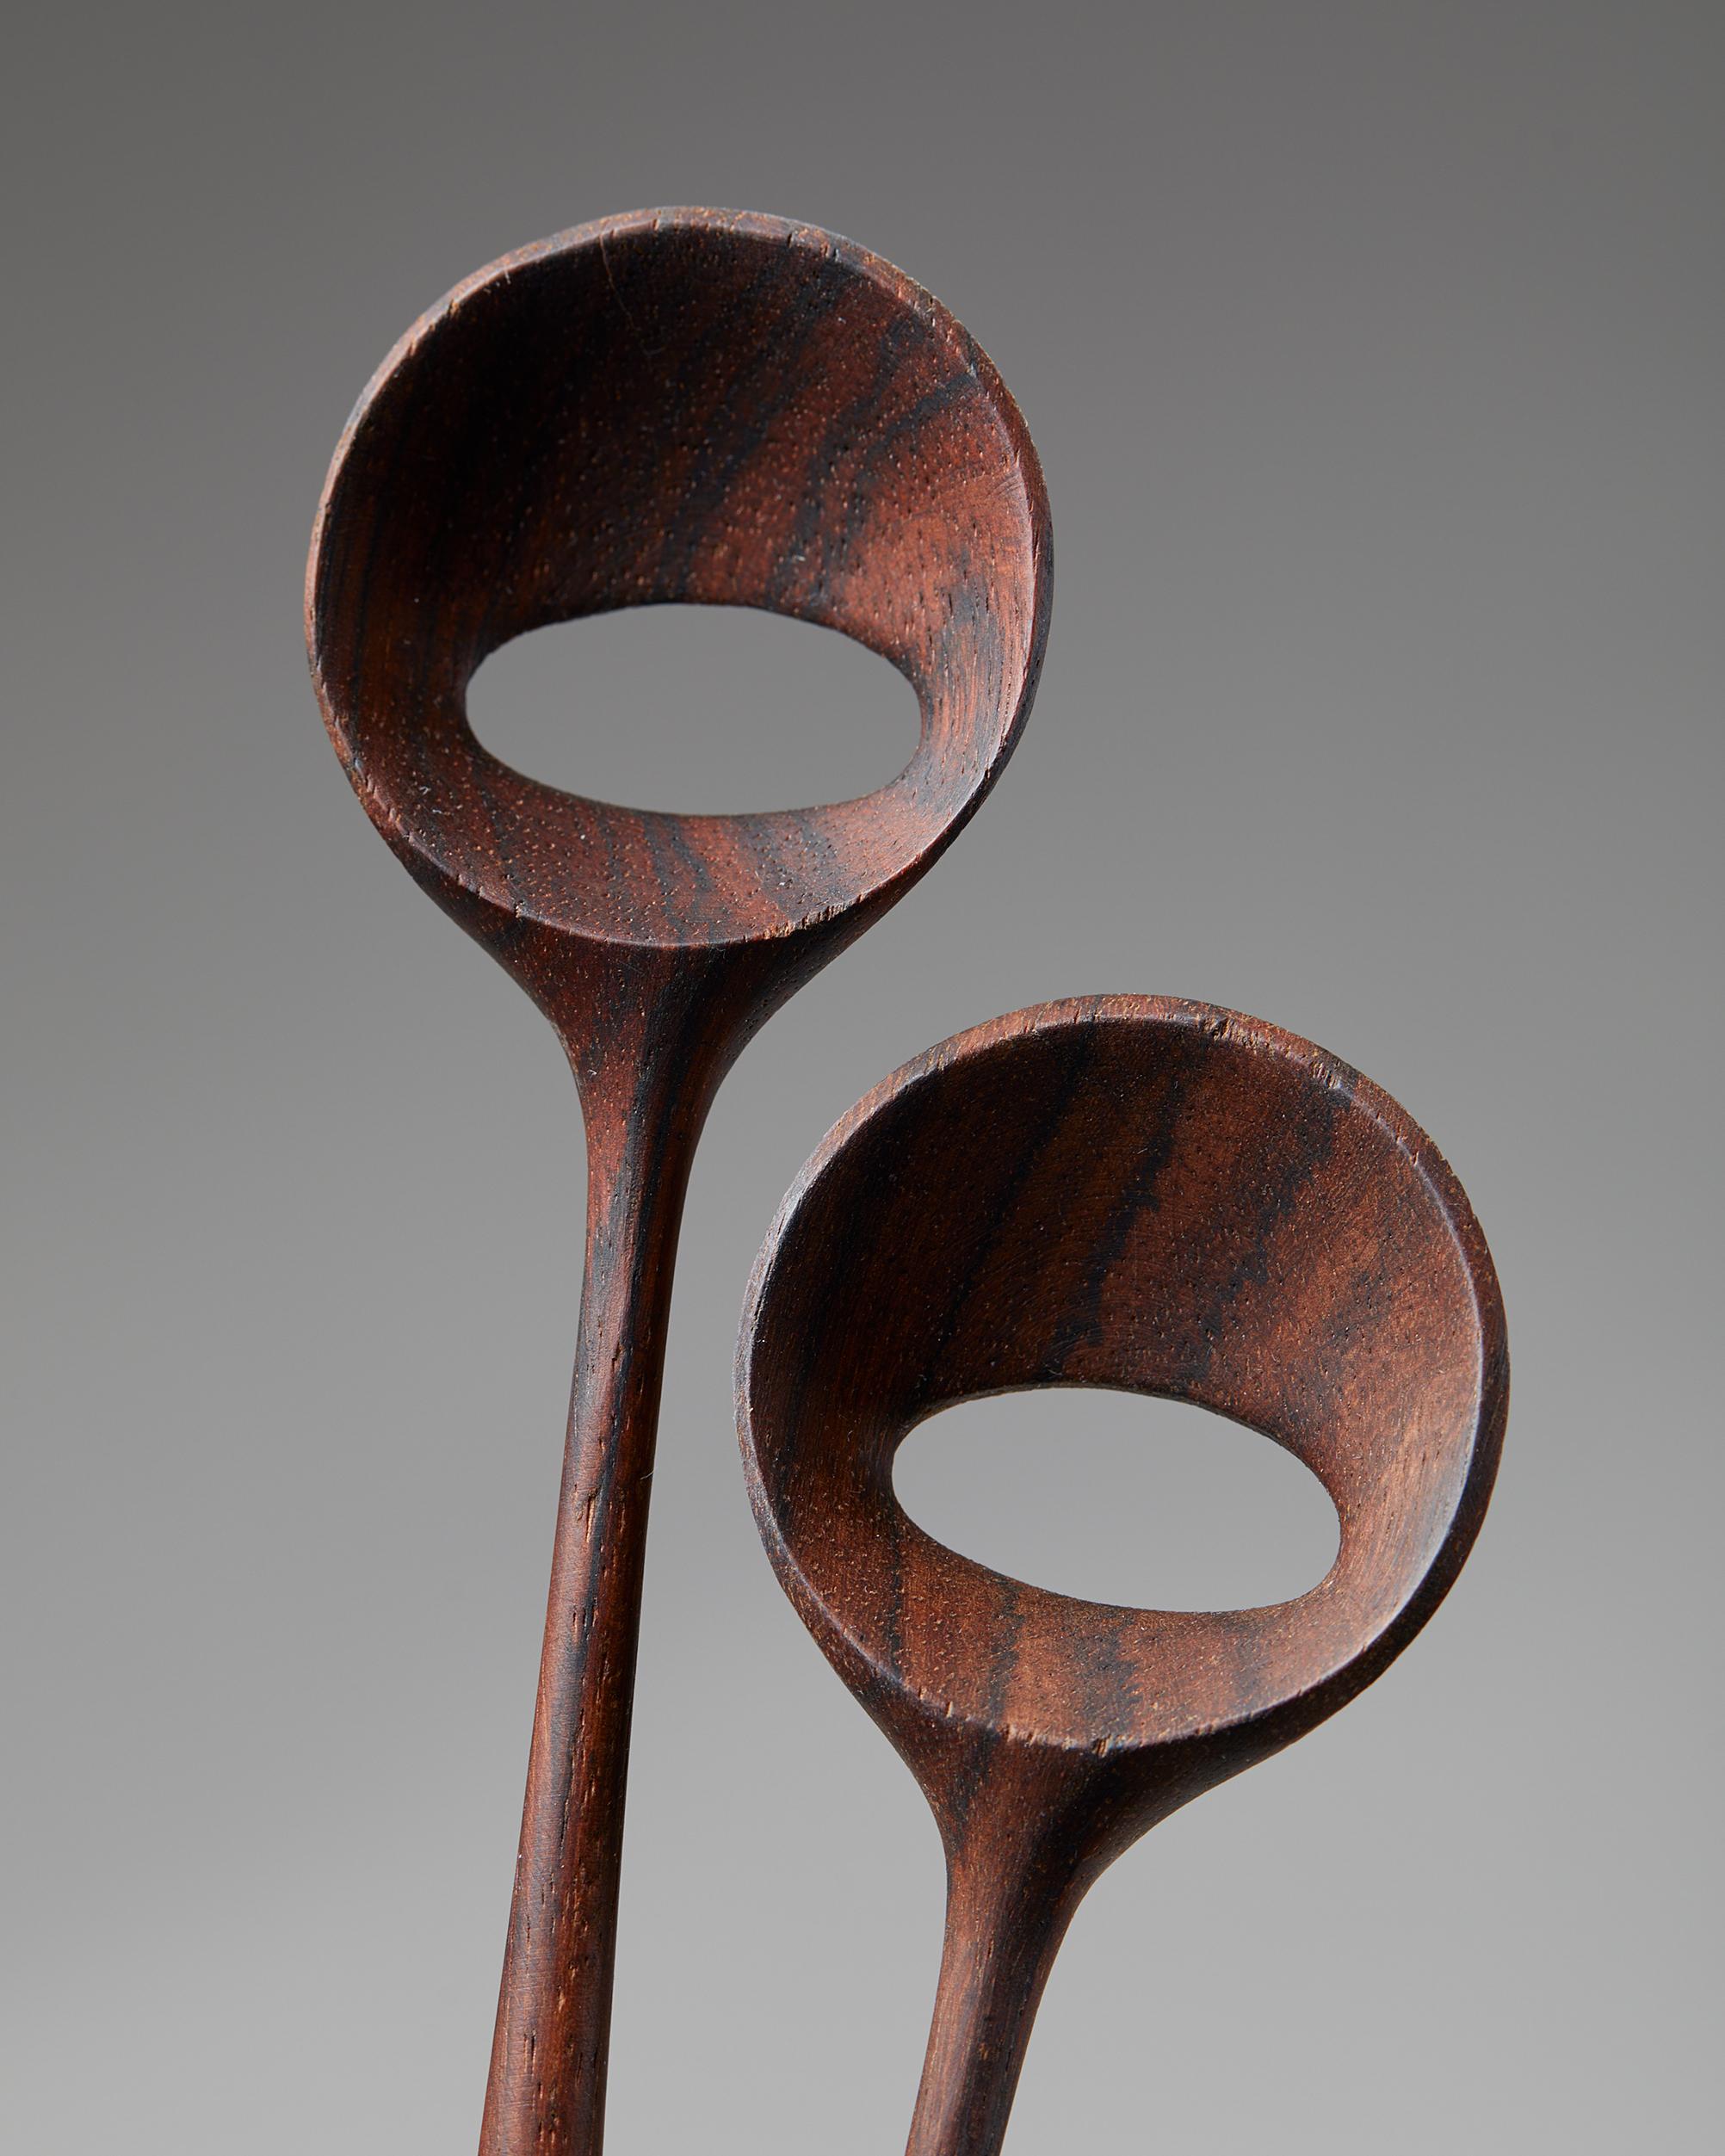 Rosewood Pair of Serving Spoons, Made by Magne Monsen, Denmark, 1950s